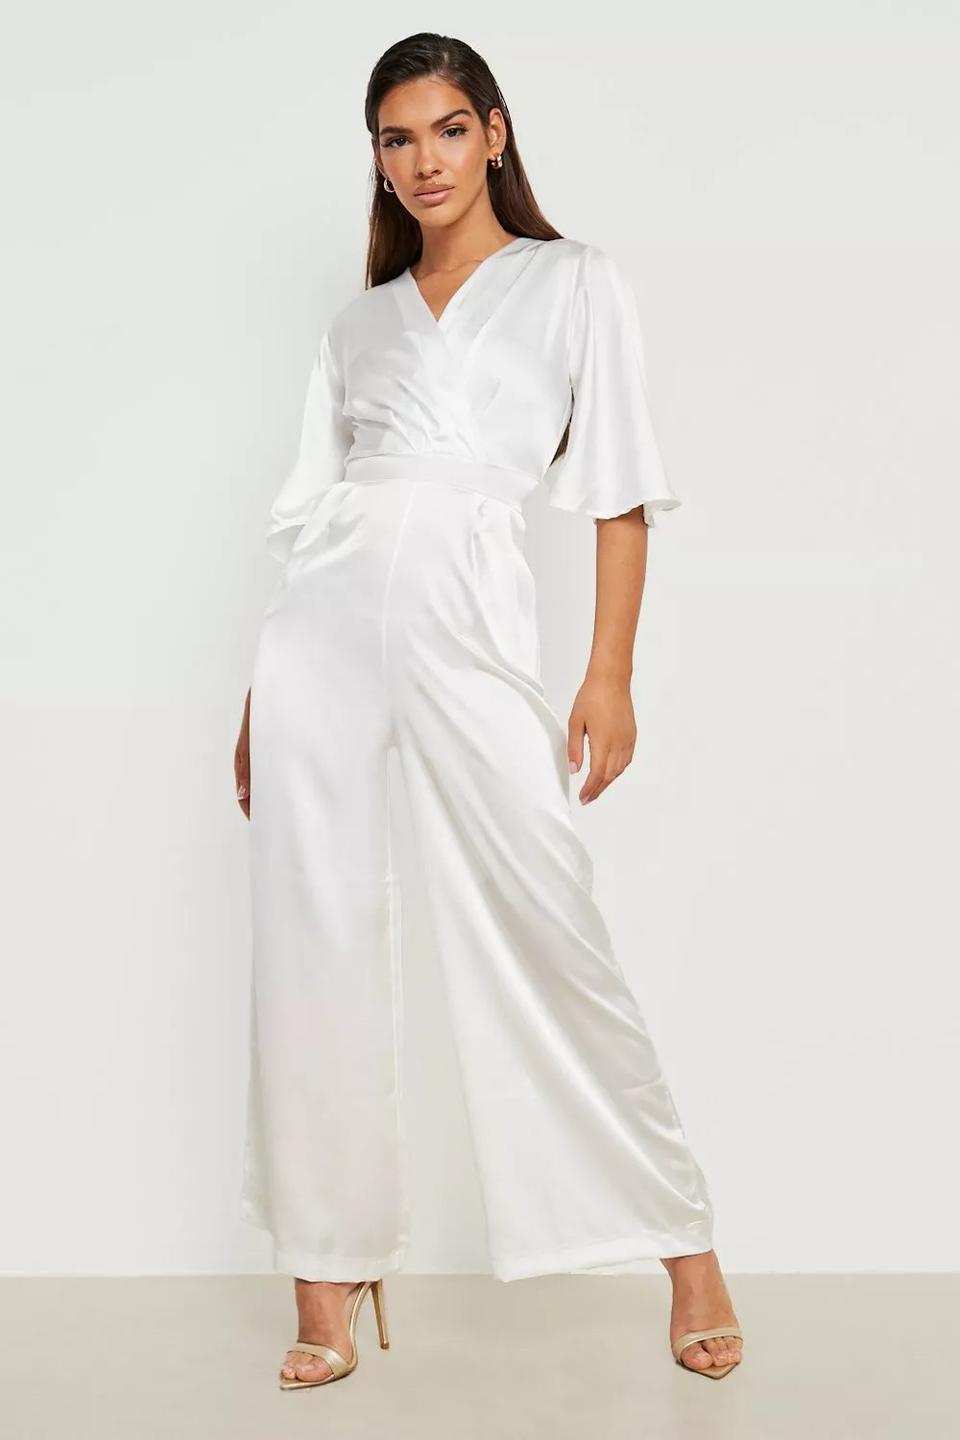 28 of the Best Wedding Jumpsuits for Brides in the UK - hitched.co.uk ...